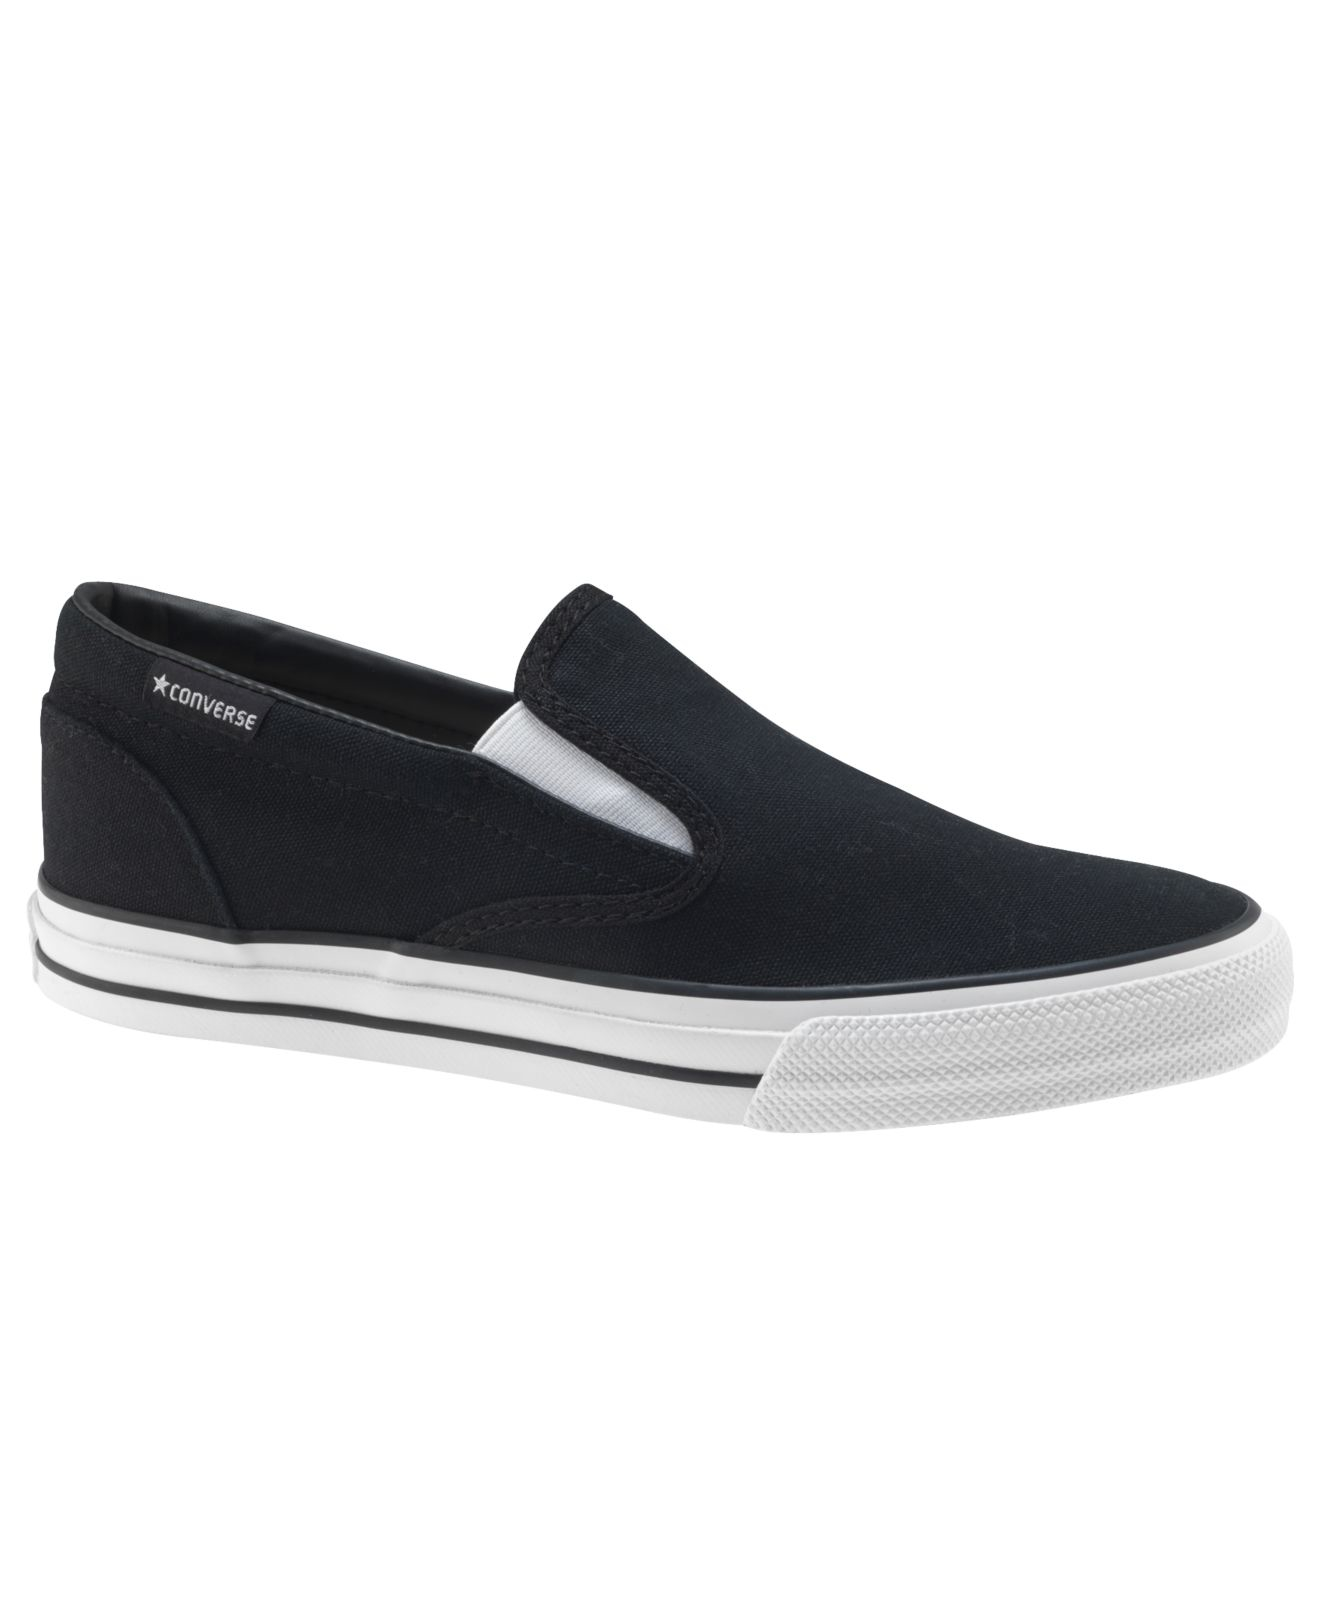 Lyst - Converse Men's Skid Grip Slip On Sneakers From Finish Line in ...